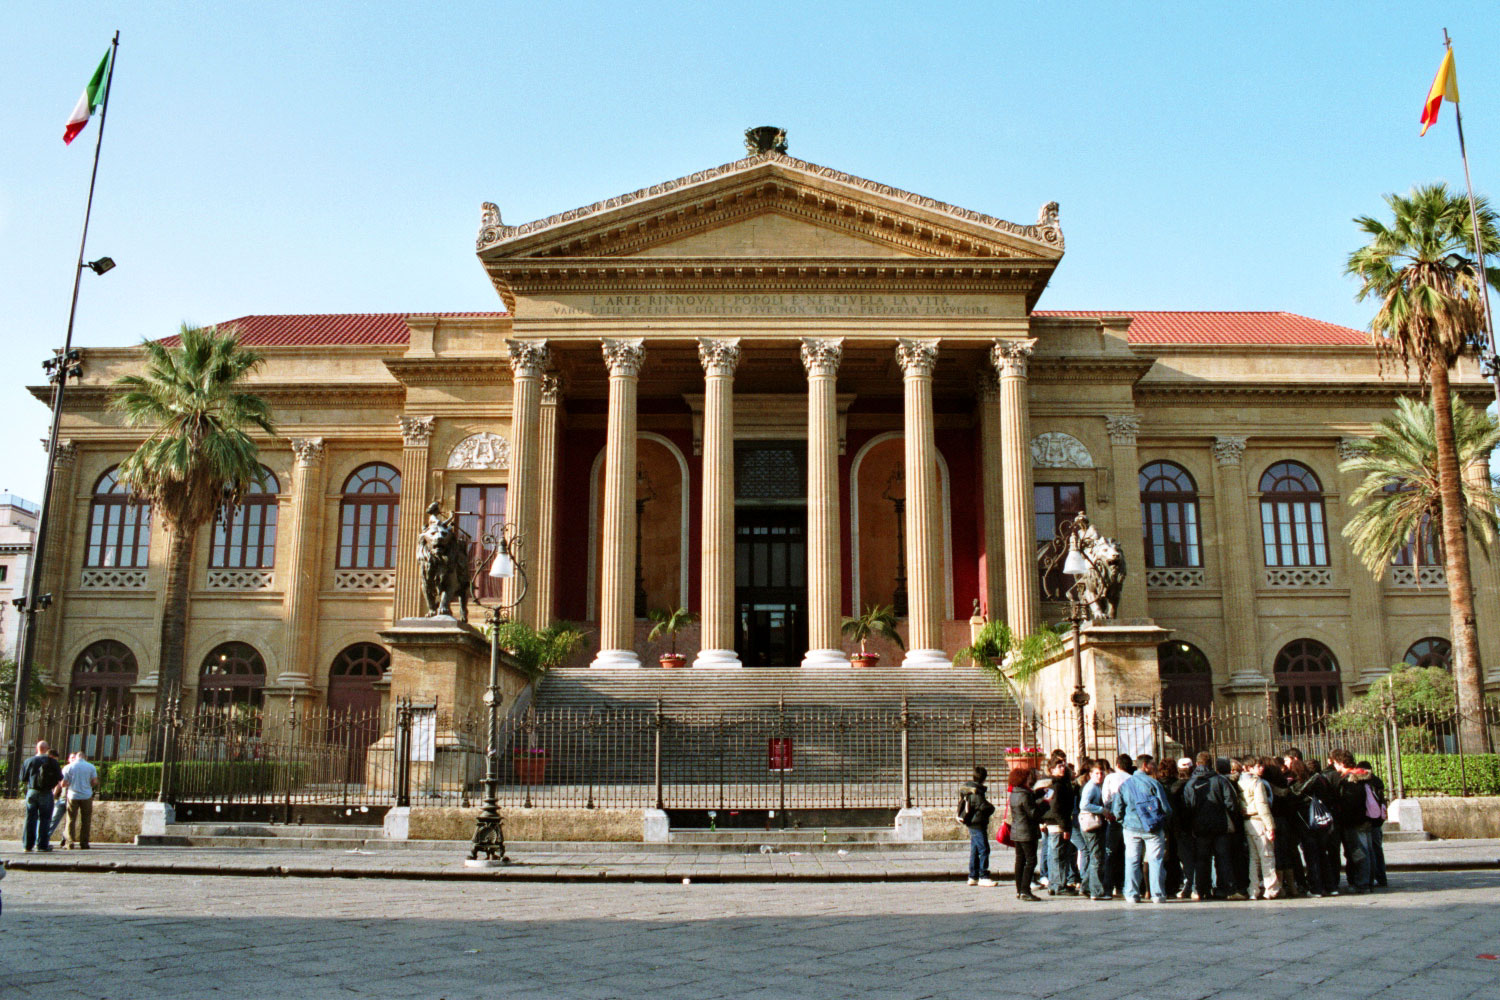 Stalking The Belle Époque Building Of The Week The Teatro Massimo